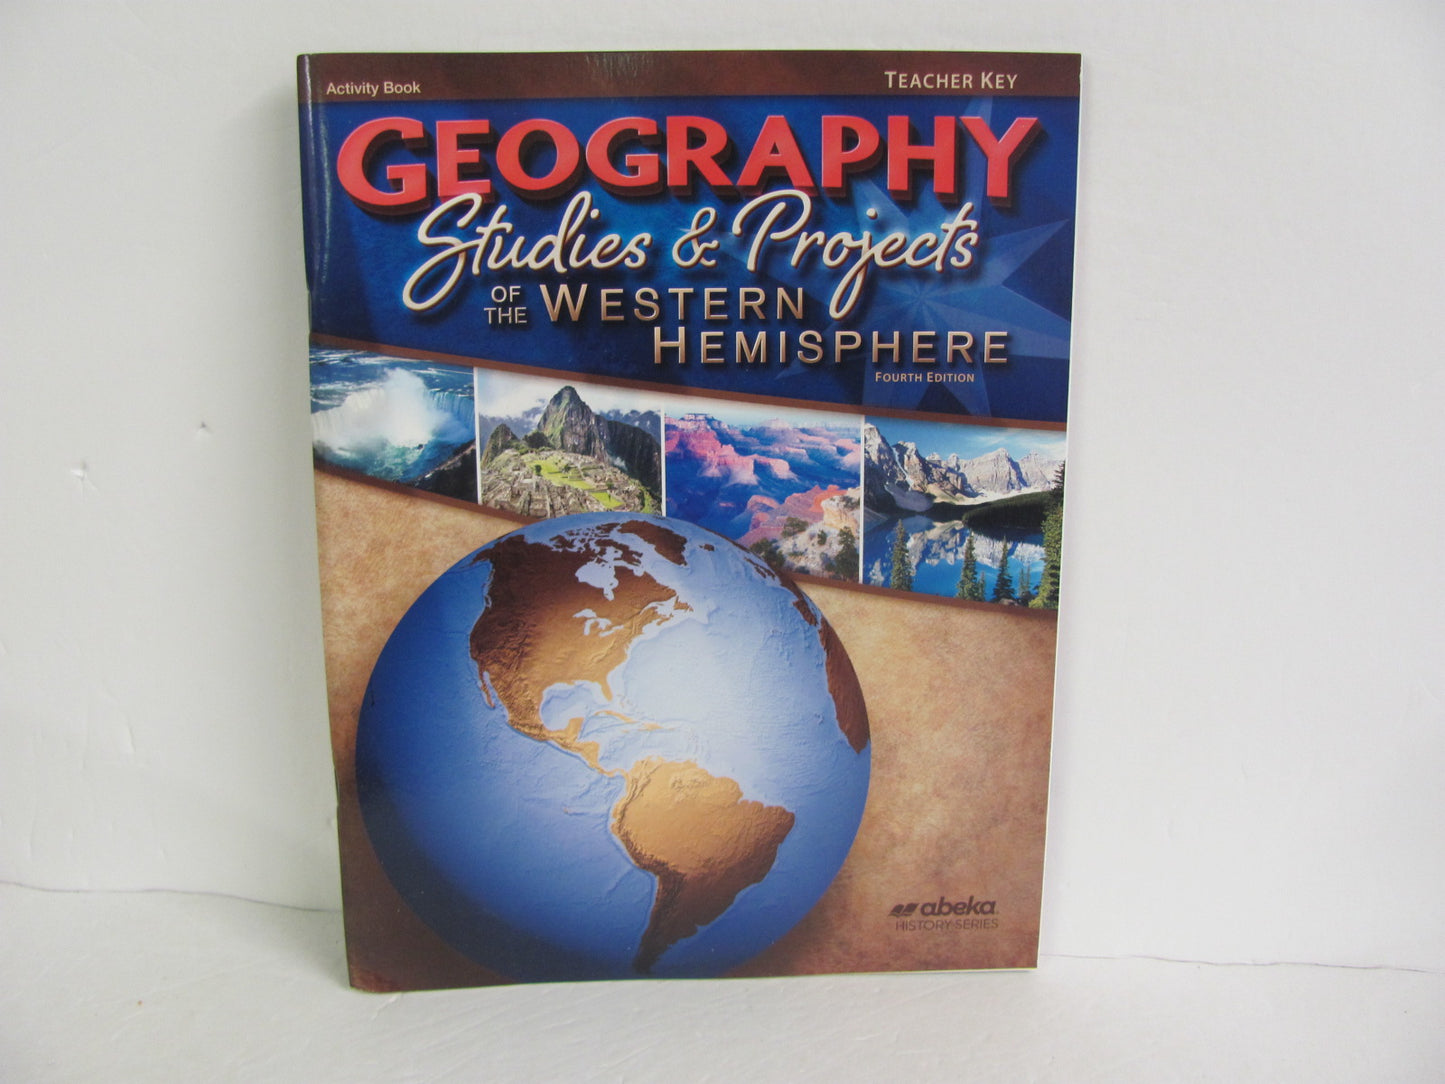 Geography Studies & Projects Abeka Teacher Key  Pre-Owned History Textbooks